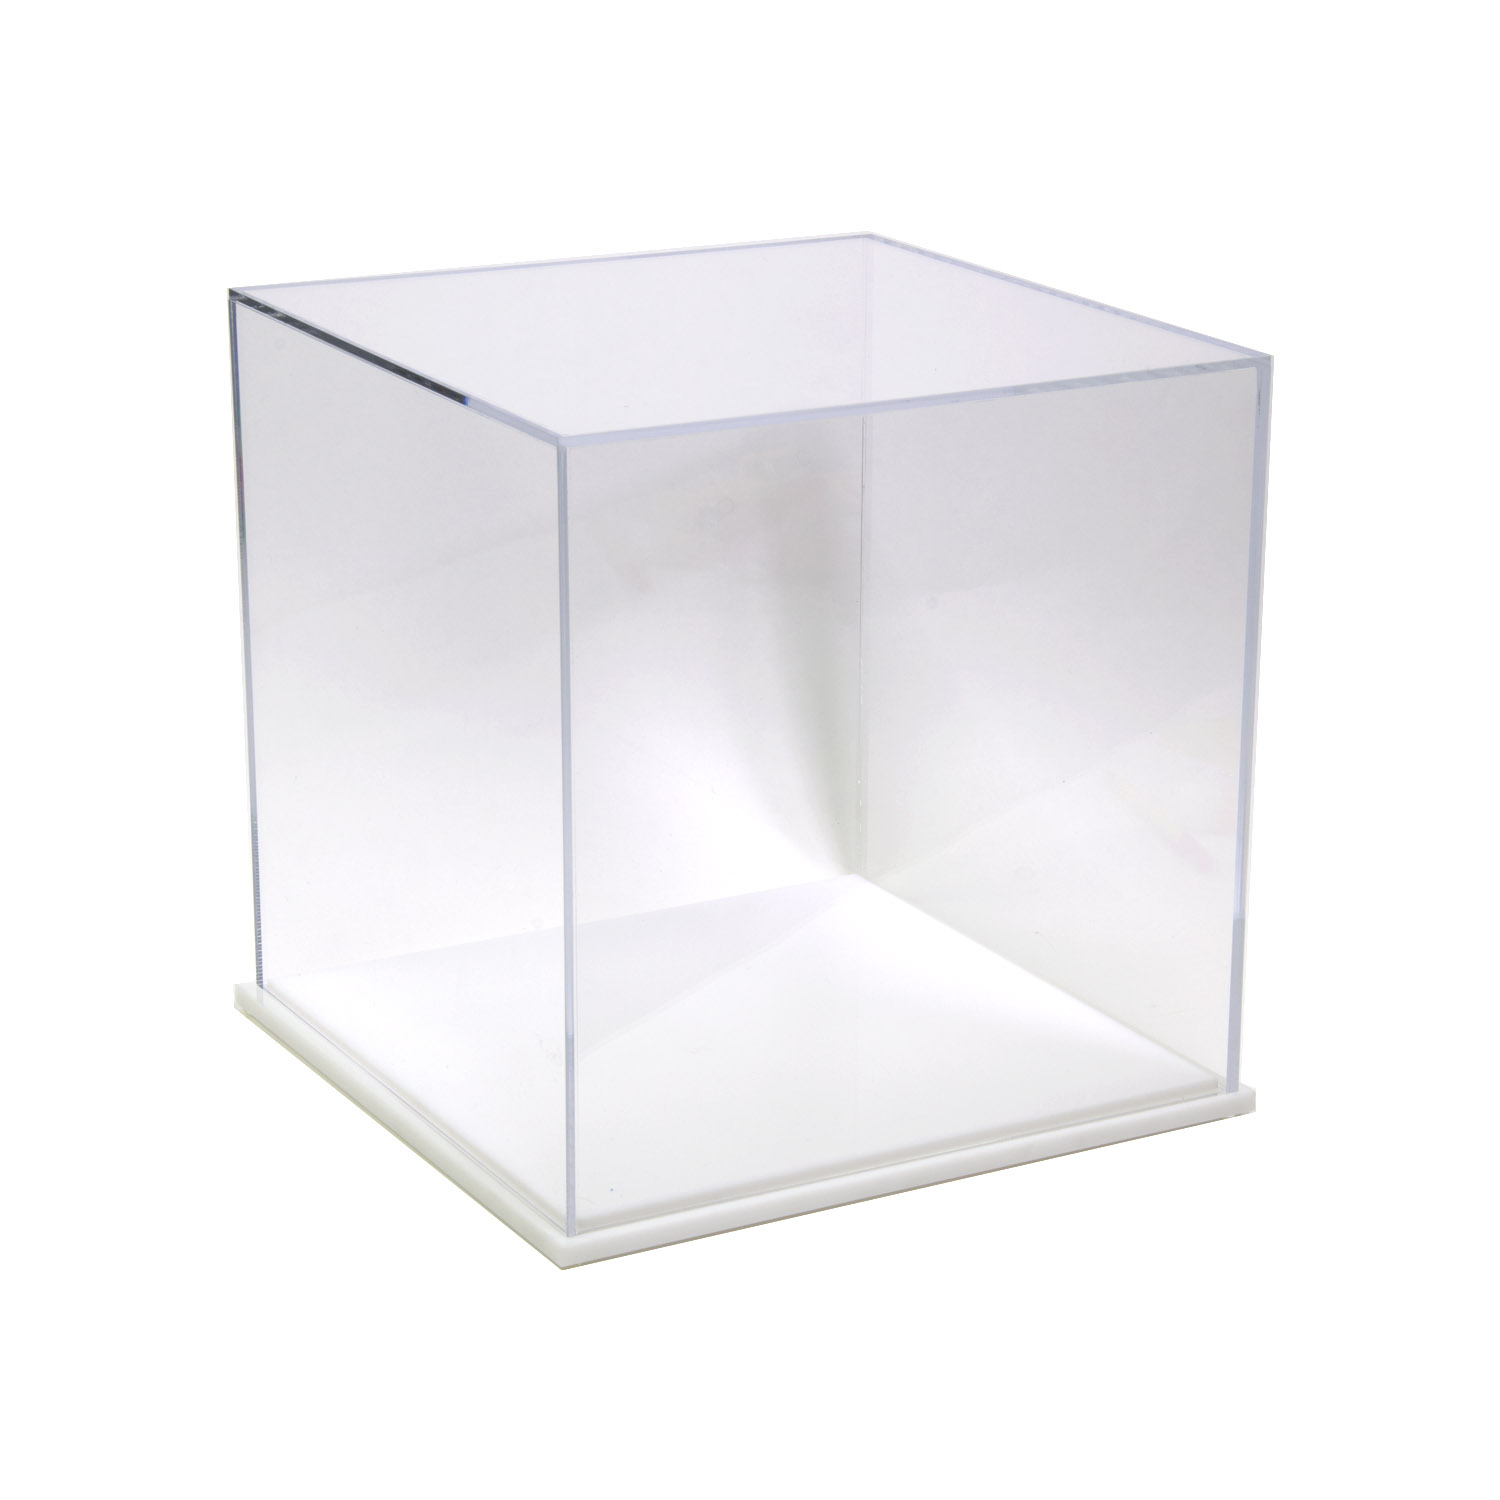 Medium Rectangle Box with Mirror 15.25"x12"x9" A025-DS Table Top Display Case 